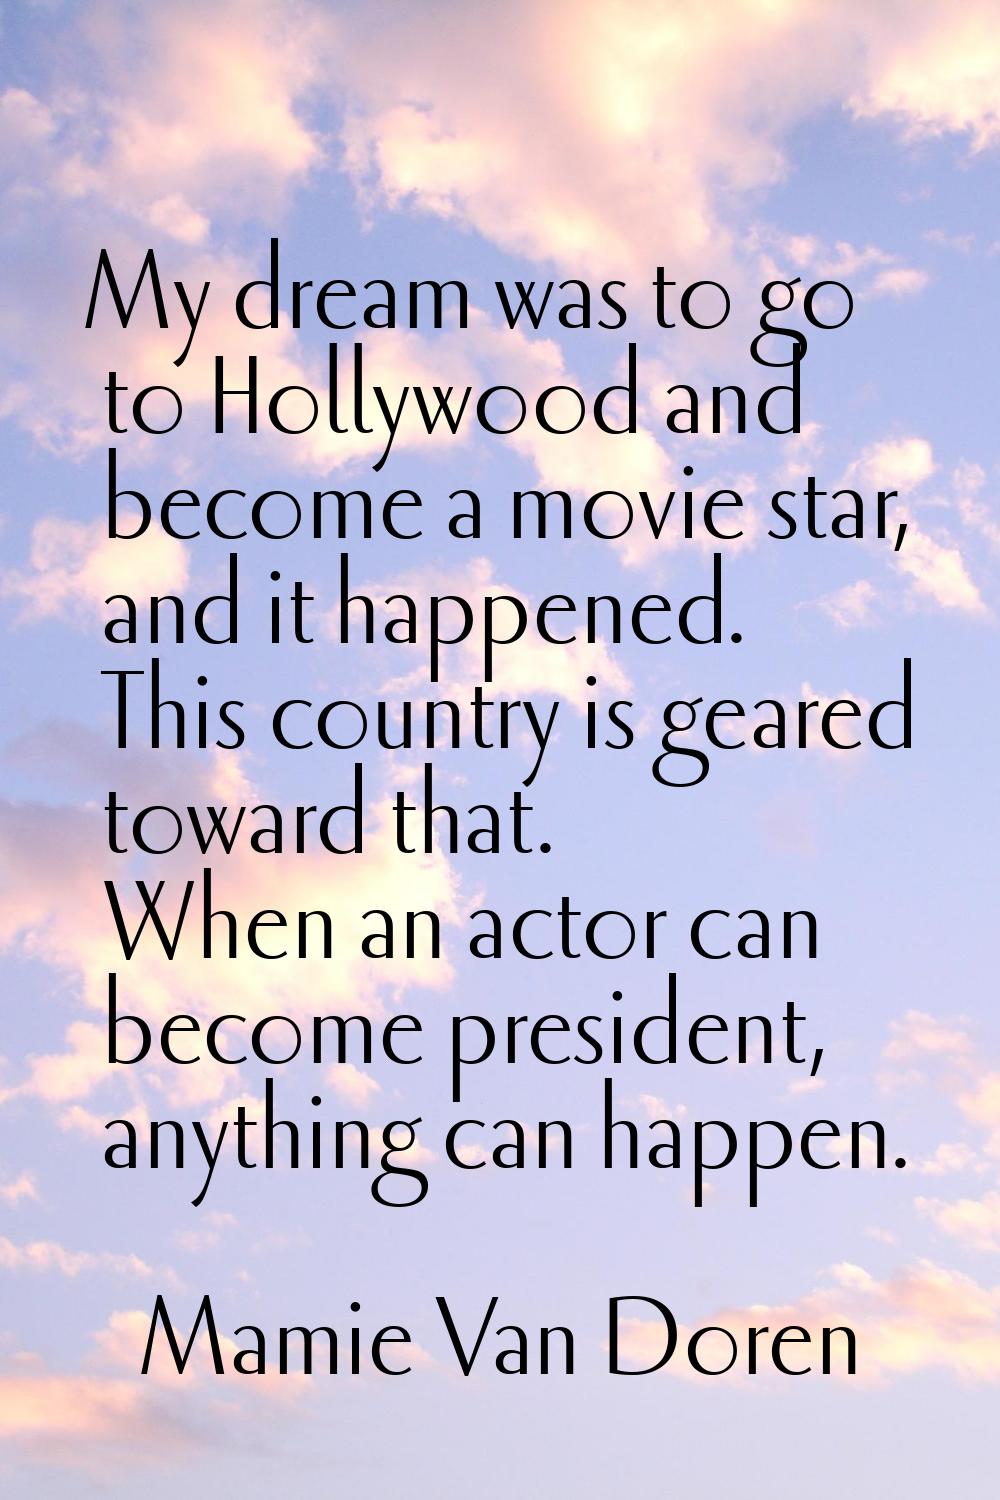 My dream was to go to Hollywood and become a movie star, and it happened. This country is geared to